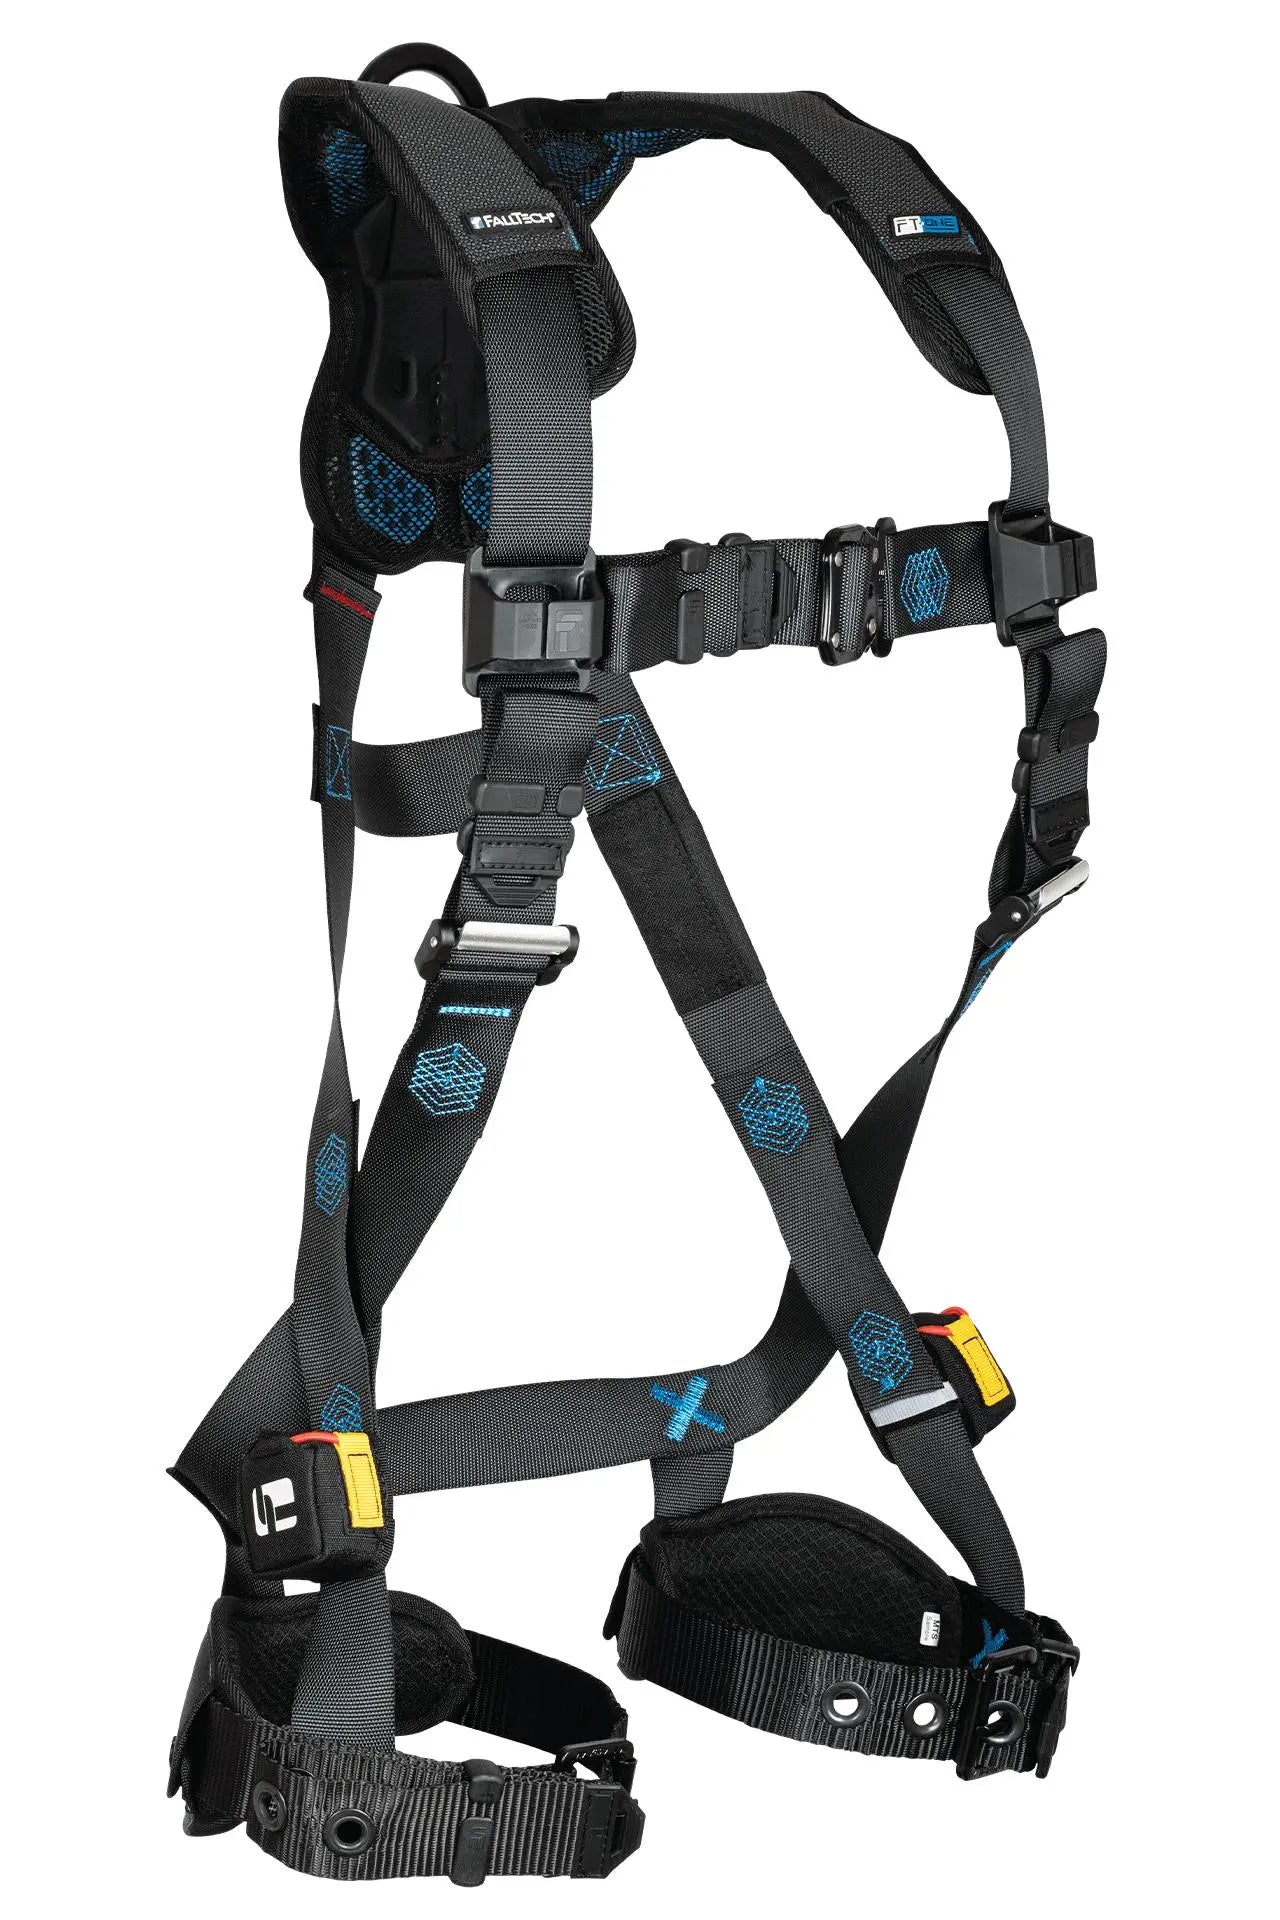 FALLTECH - FT-One‚ 1D Standard Non-Belted Full Body Harness - Becker Safety and Supply